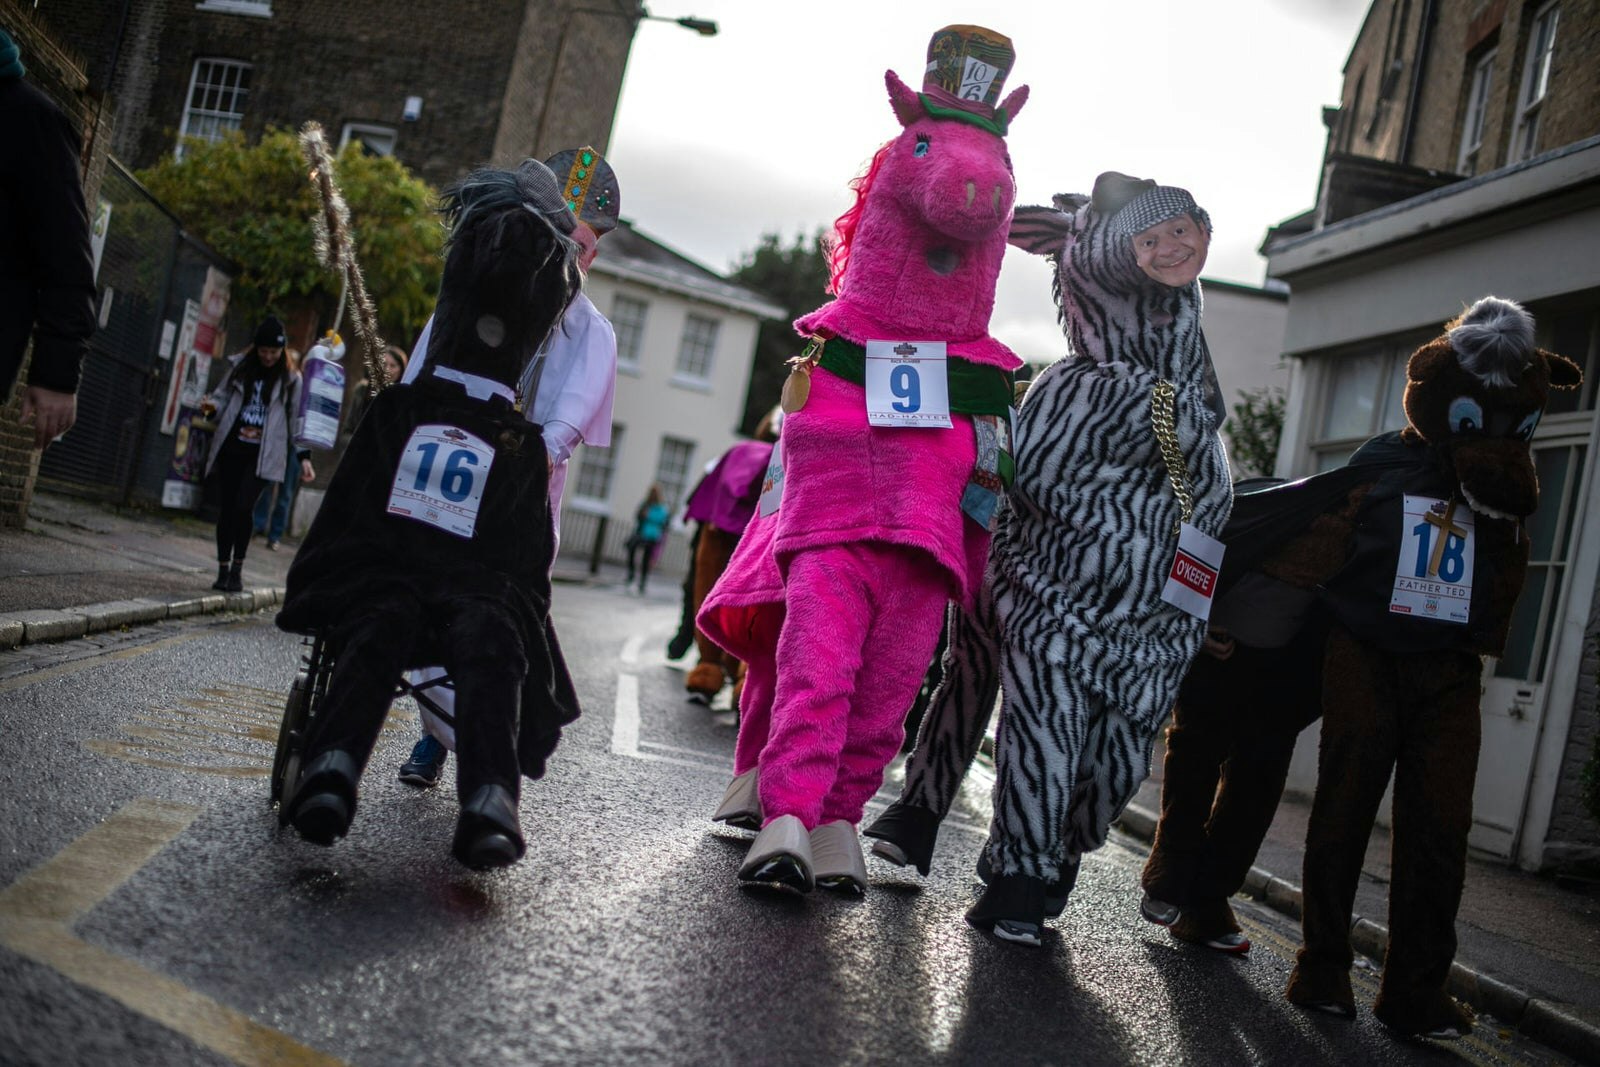 Four pantomime horses walking up a road in London. They are vaguely 'Only Fools and Horses' themed, with one zebra-patterned horse sporting a Del Boy mask.